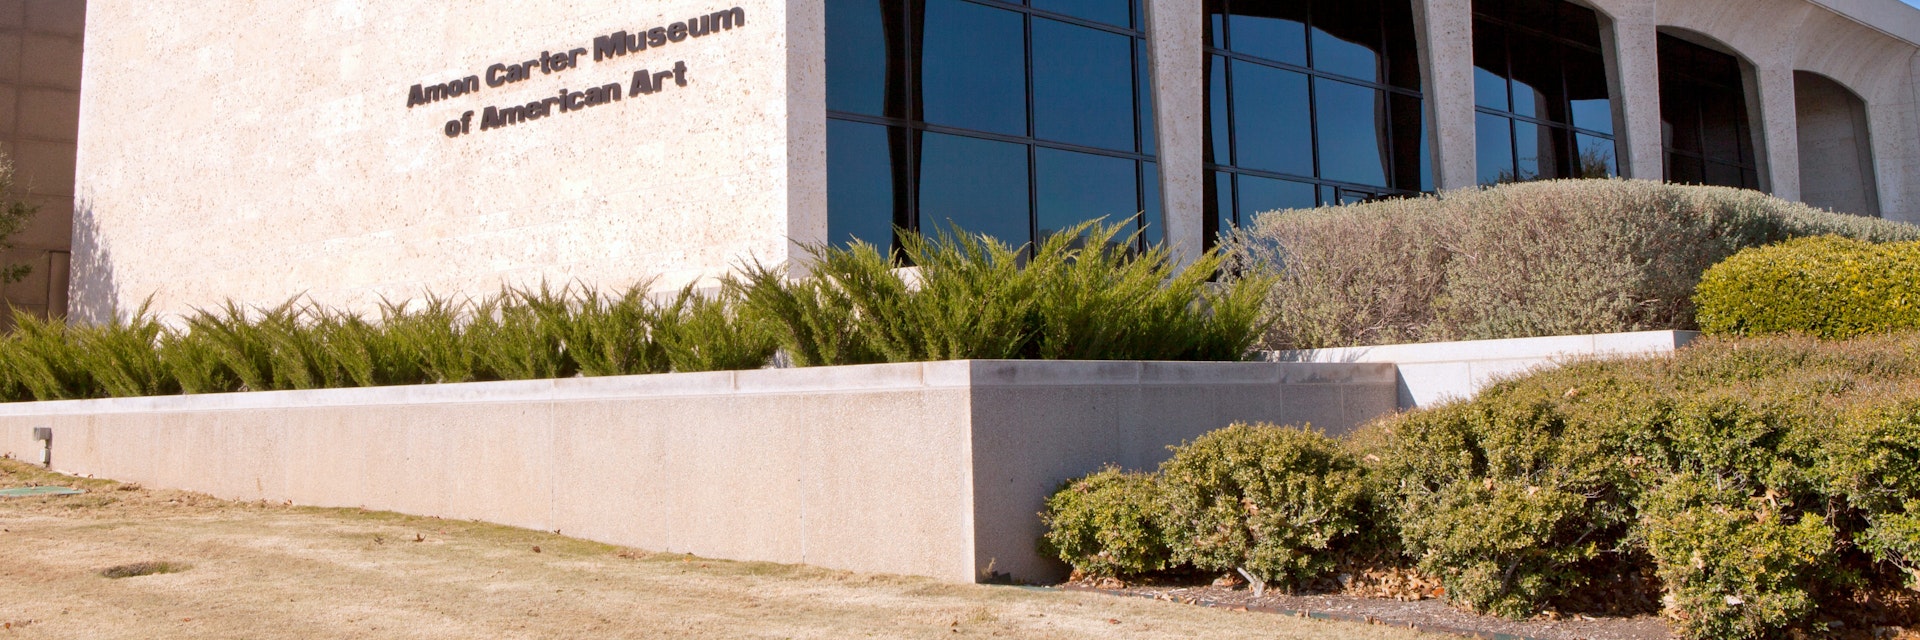 Ft Worth, Texas, USA - January 6, 2015: The Amon Carter Museum of American Art is located in the cultural district of Fort Worth, Texas. The museum devoted to American art and possesses one of the premier collections of American photography in the nation.
Amon Carter Museum - Ft Worth, Texas Landmark - stock photo
